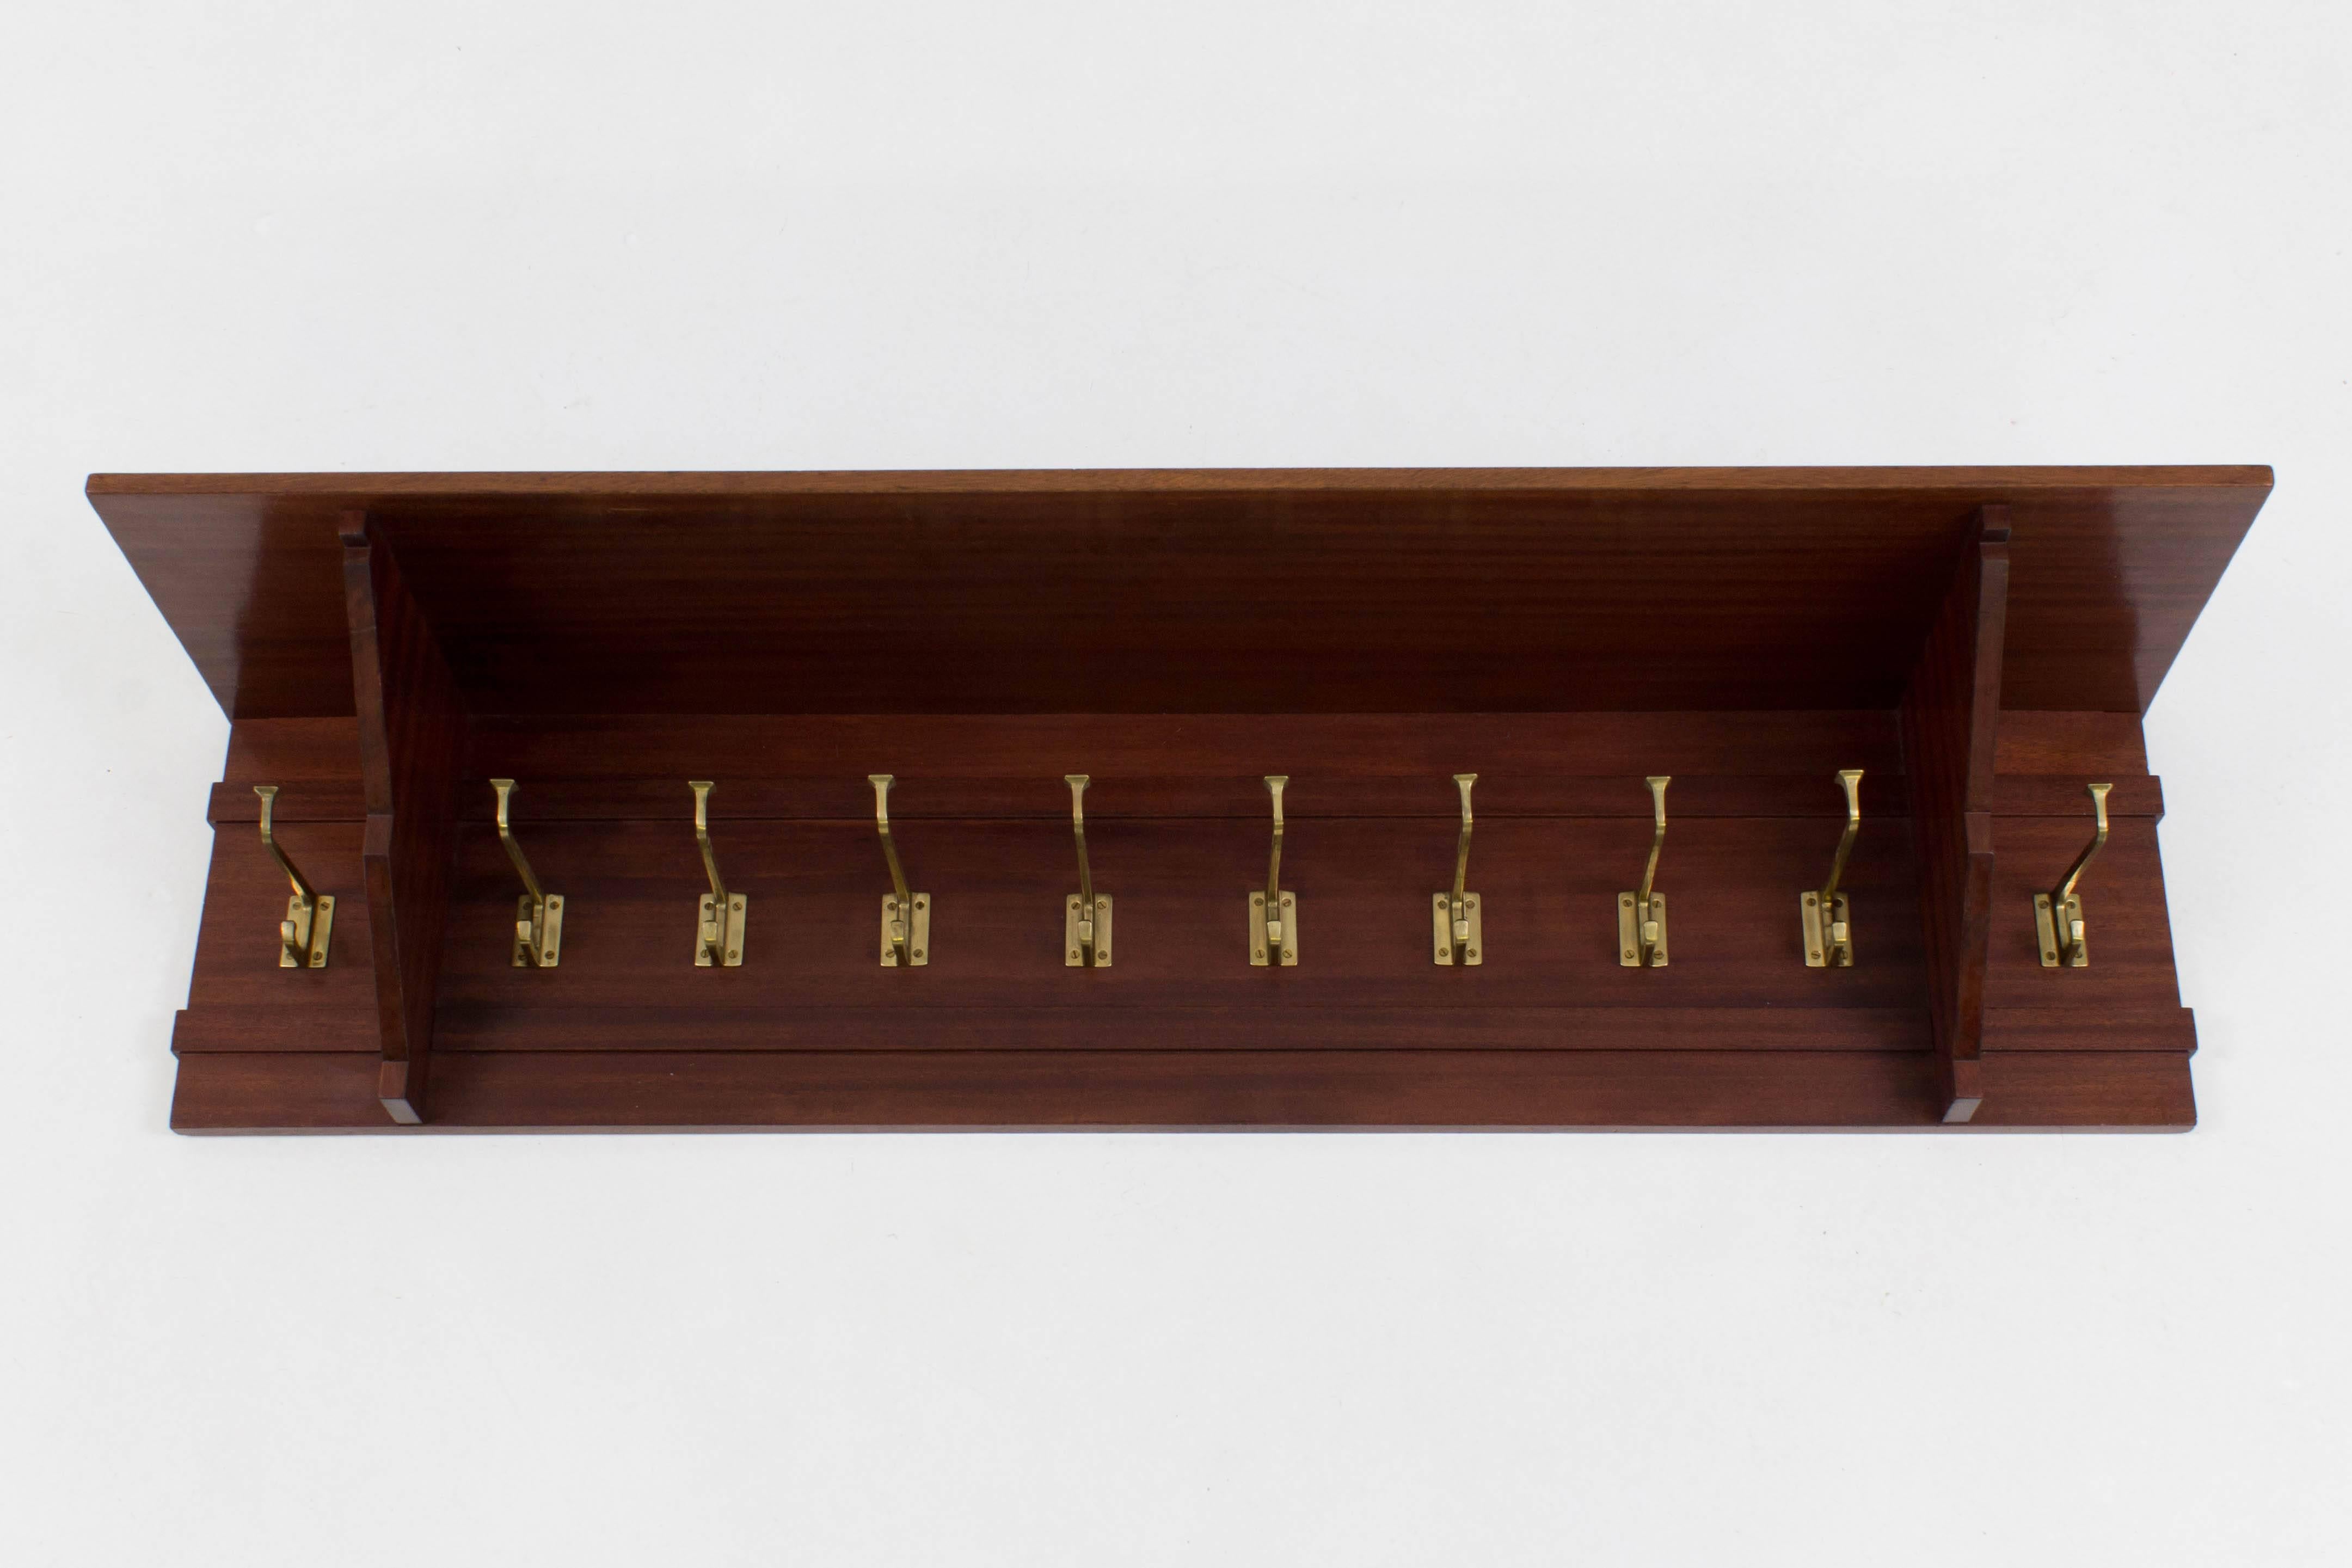 Dutch Art Deco Amsterdam School coat rack 1920s.
Solid mahogany with ten original solid brass hooks.
In good original condition with minor wear consistent with age and use,
preserving a beautiful patina.